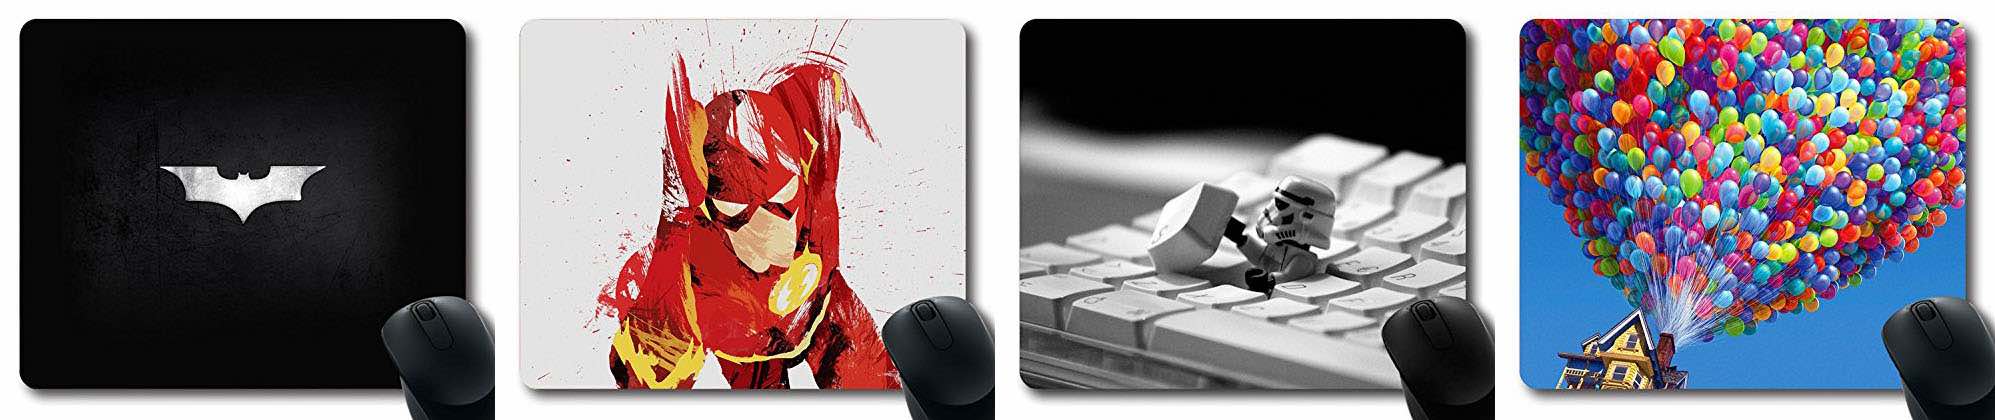 best film themed mouse mats for editing